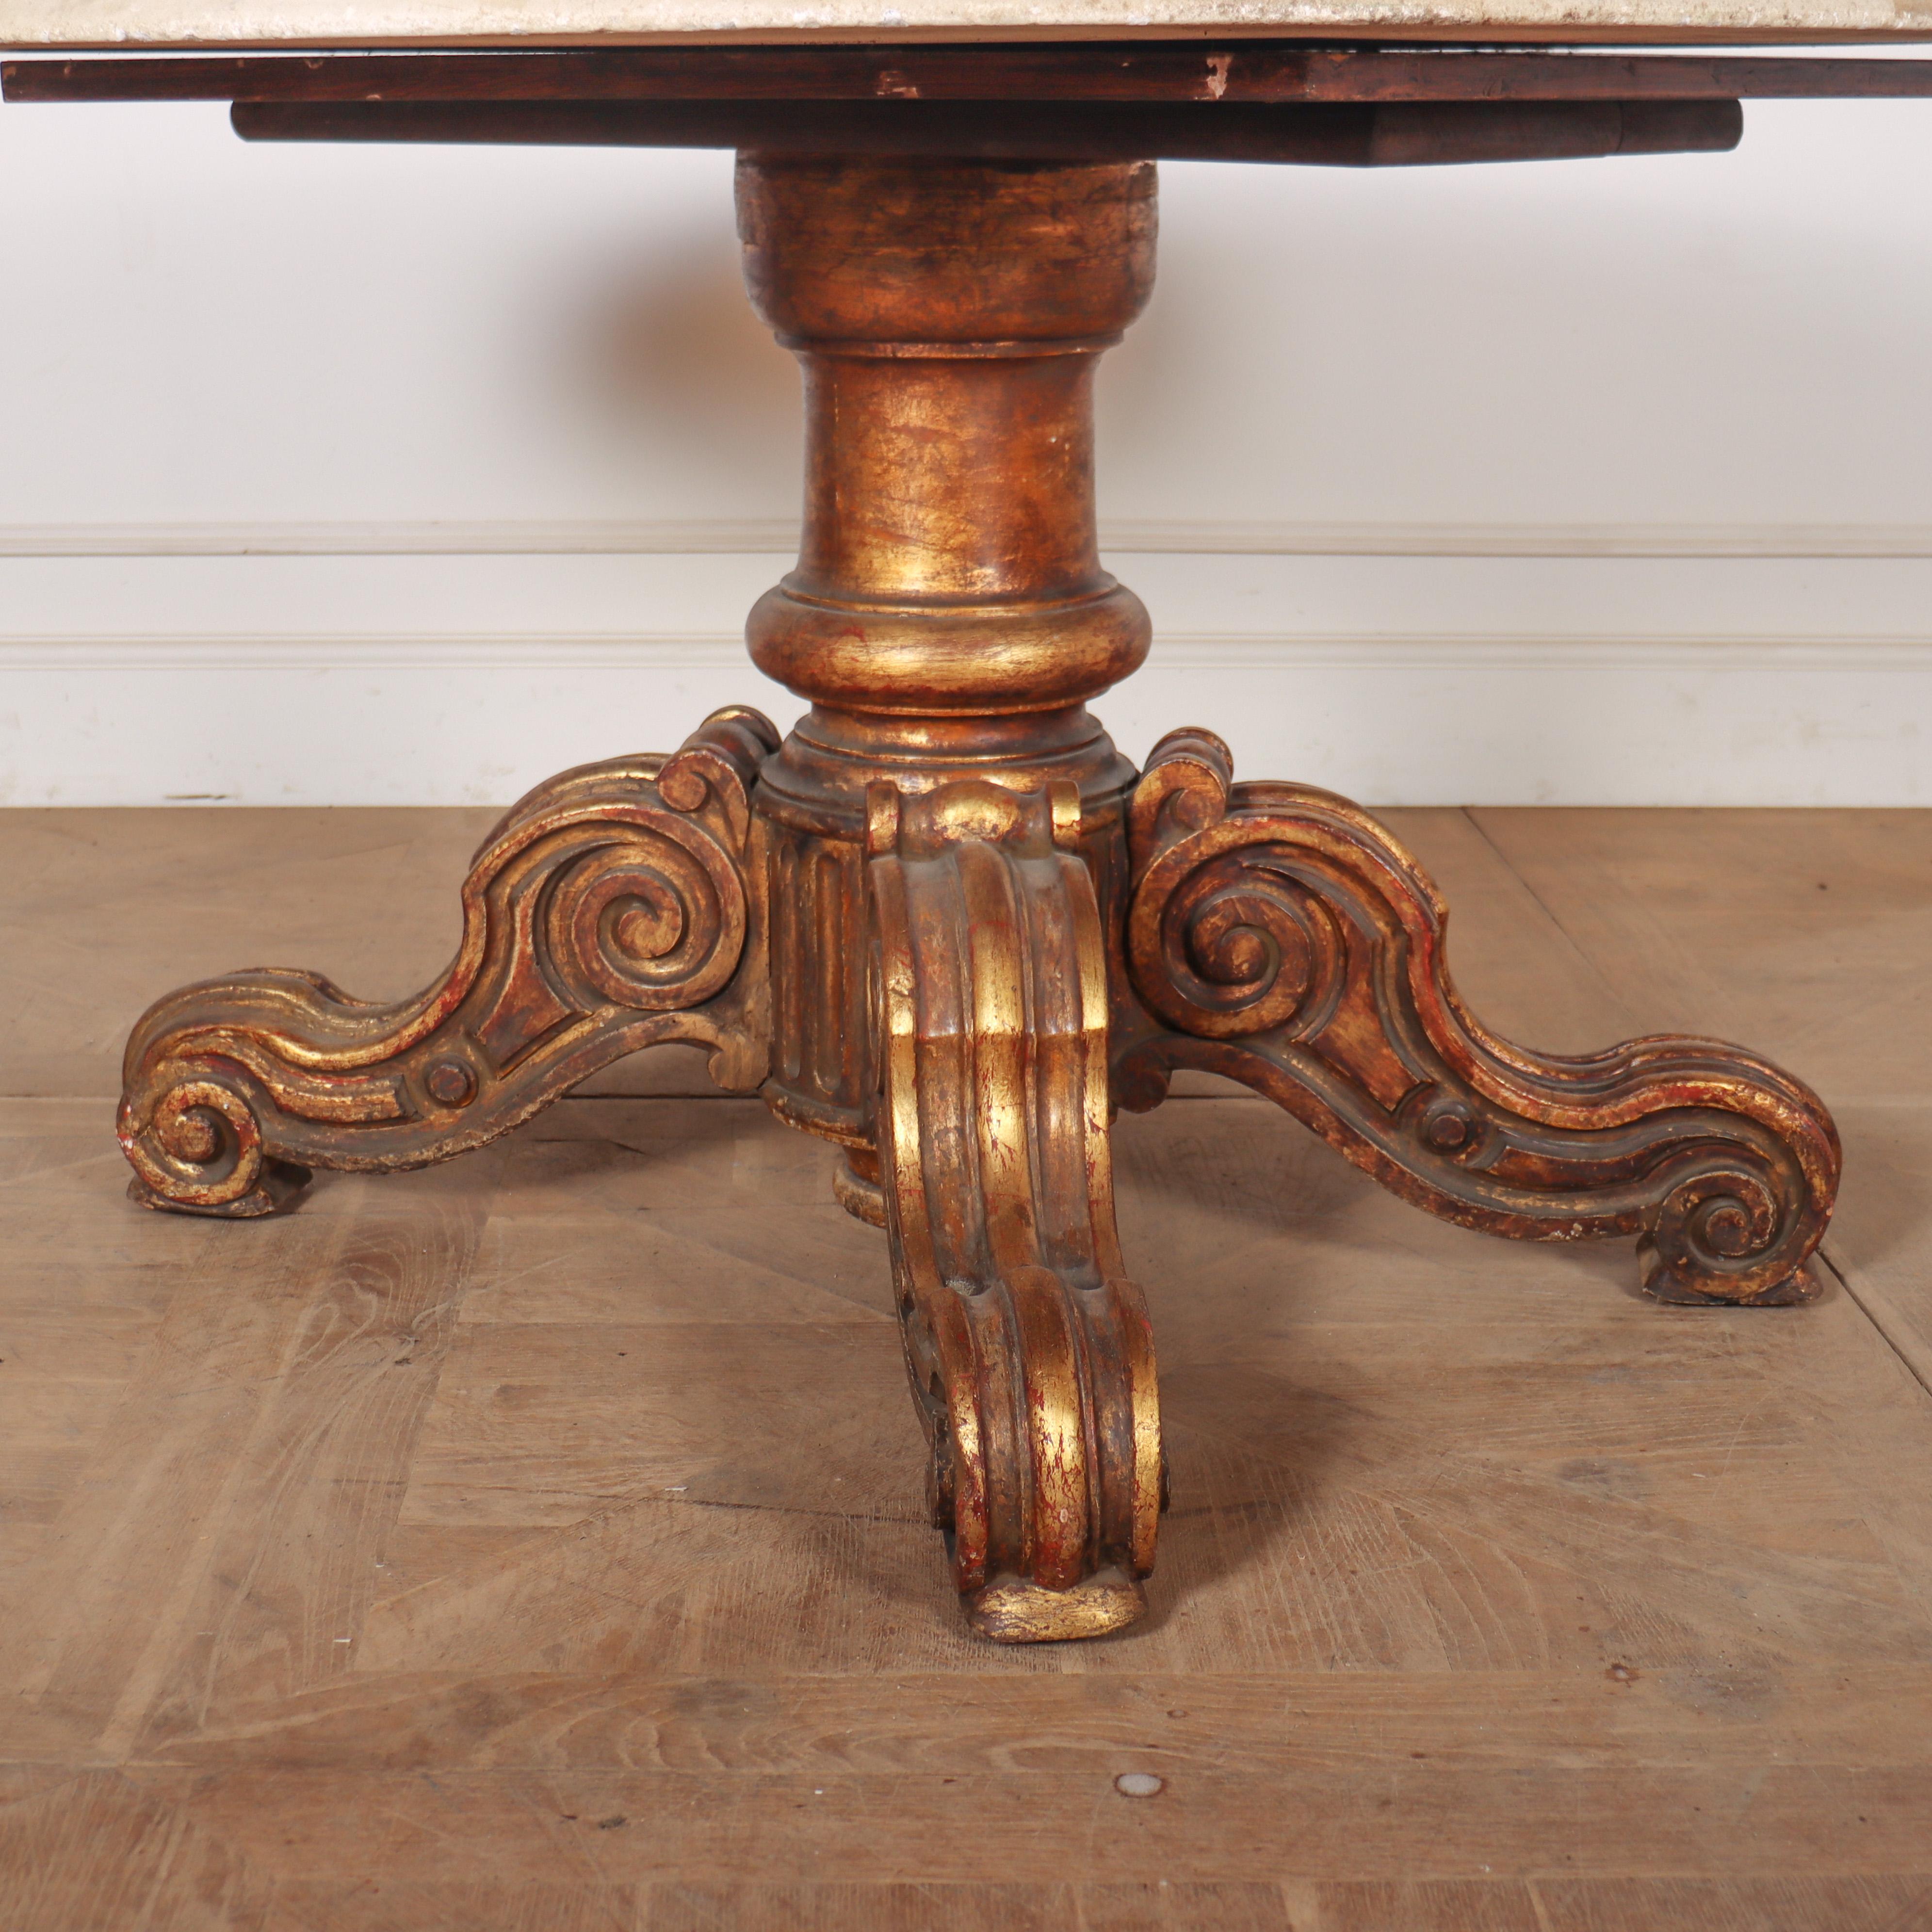 Large 19th C English marble top breakfast table with a lovely worn gilt finish. 1860

Reference: 8332

Dimensions
29.5 inches (75 cms) High
50 inches (127 cms) Diameter